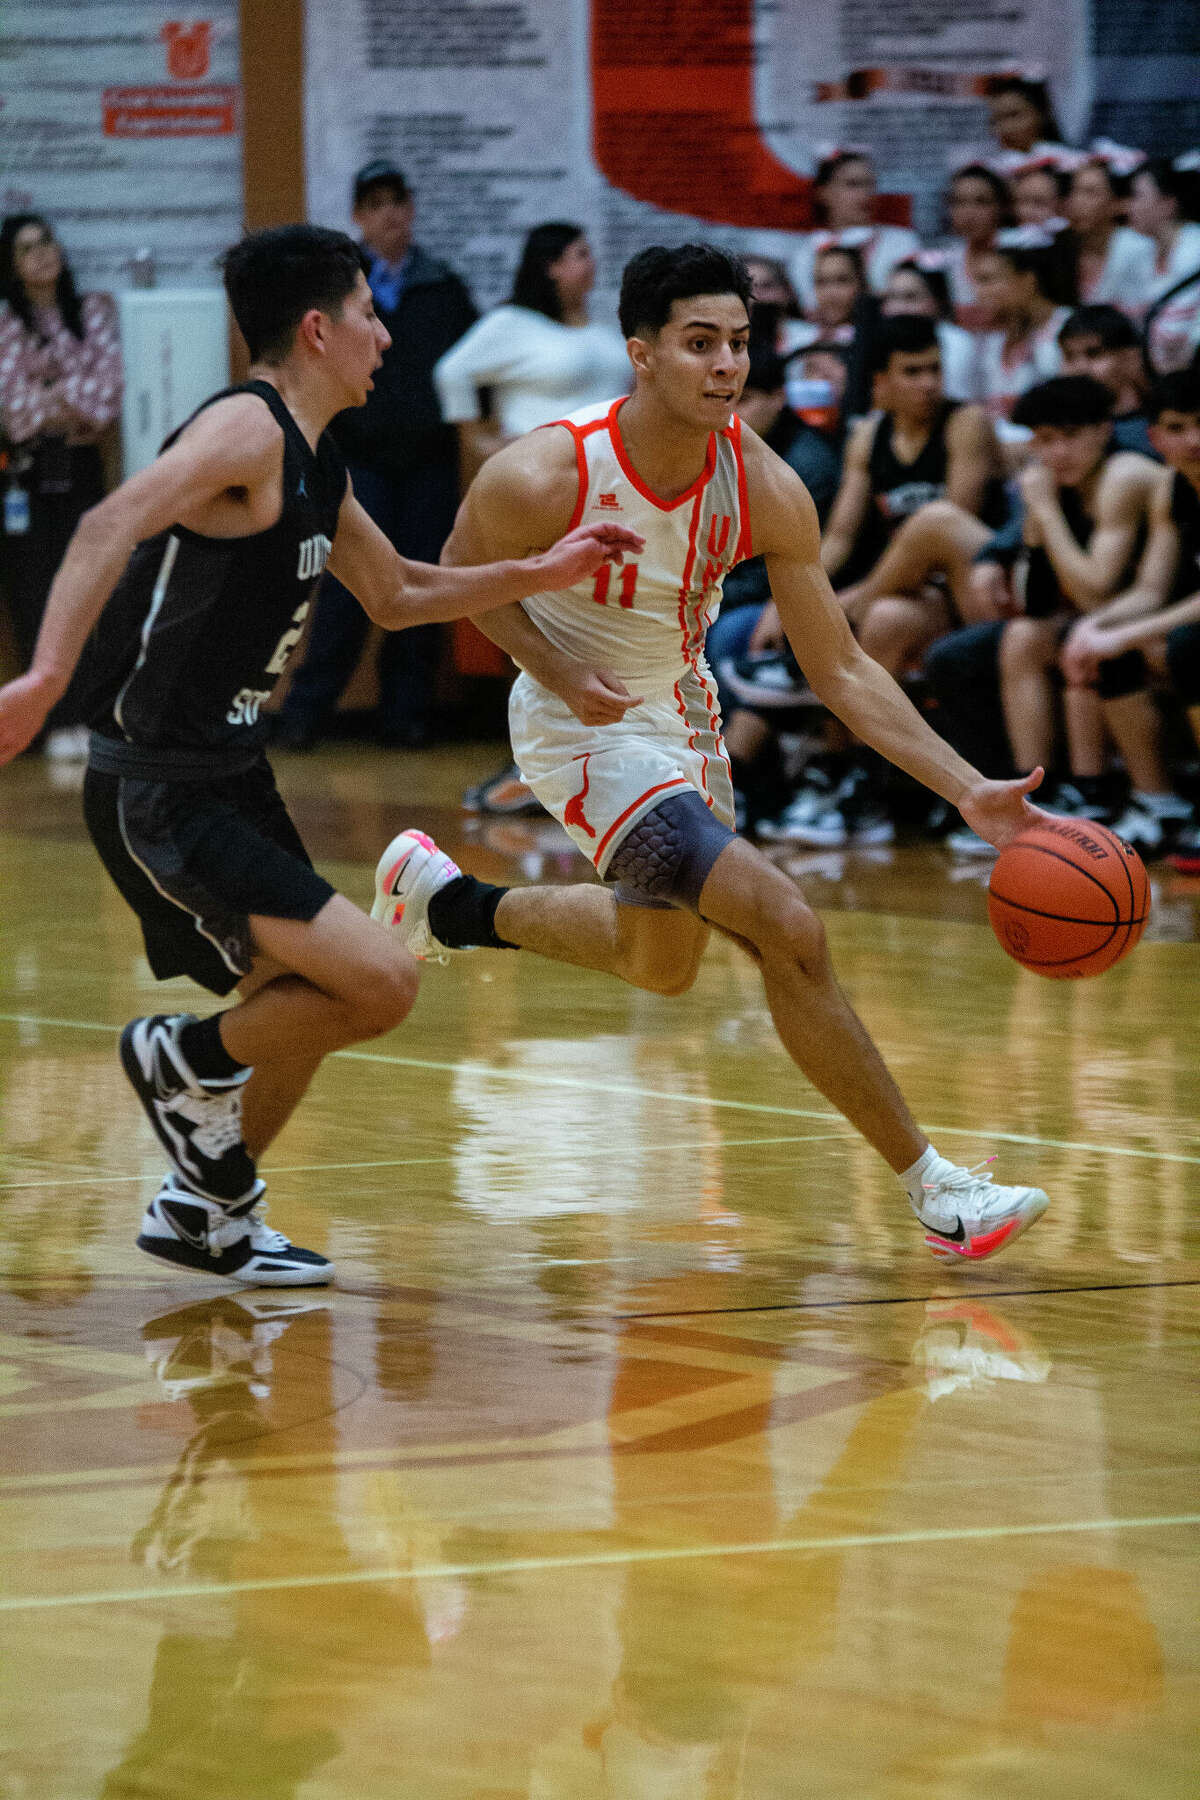 Luis Arzuaga scored 12 points as the United Longhorns beat the United South Panthers on Tuesday.